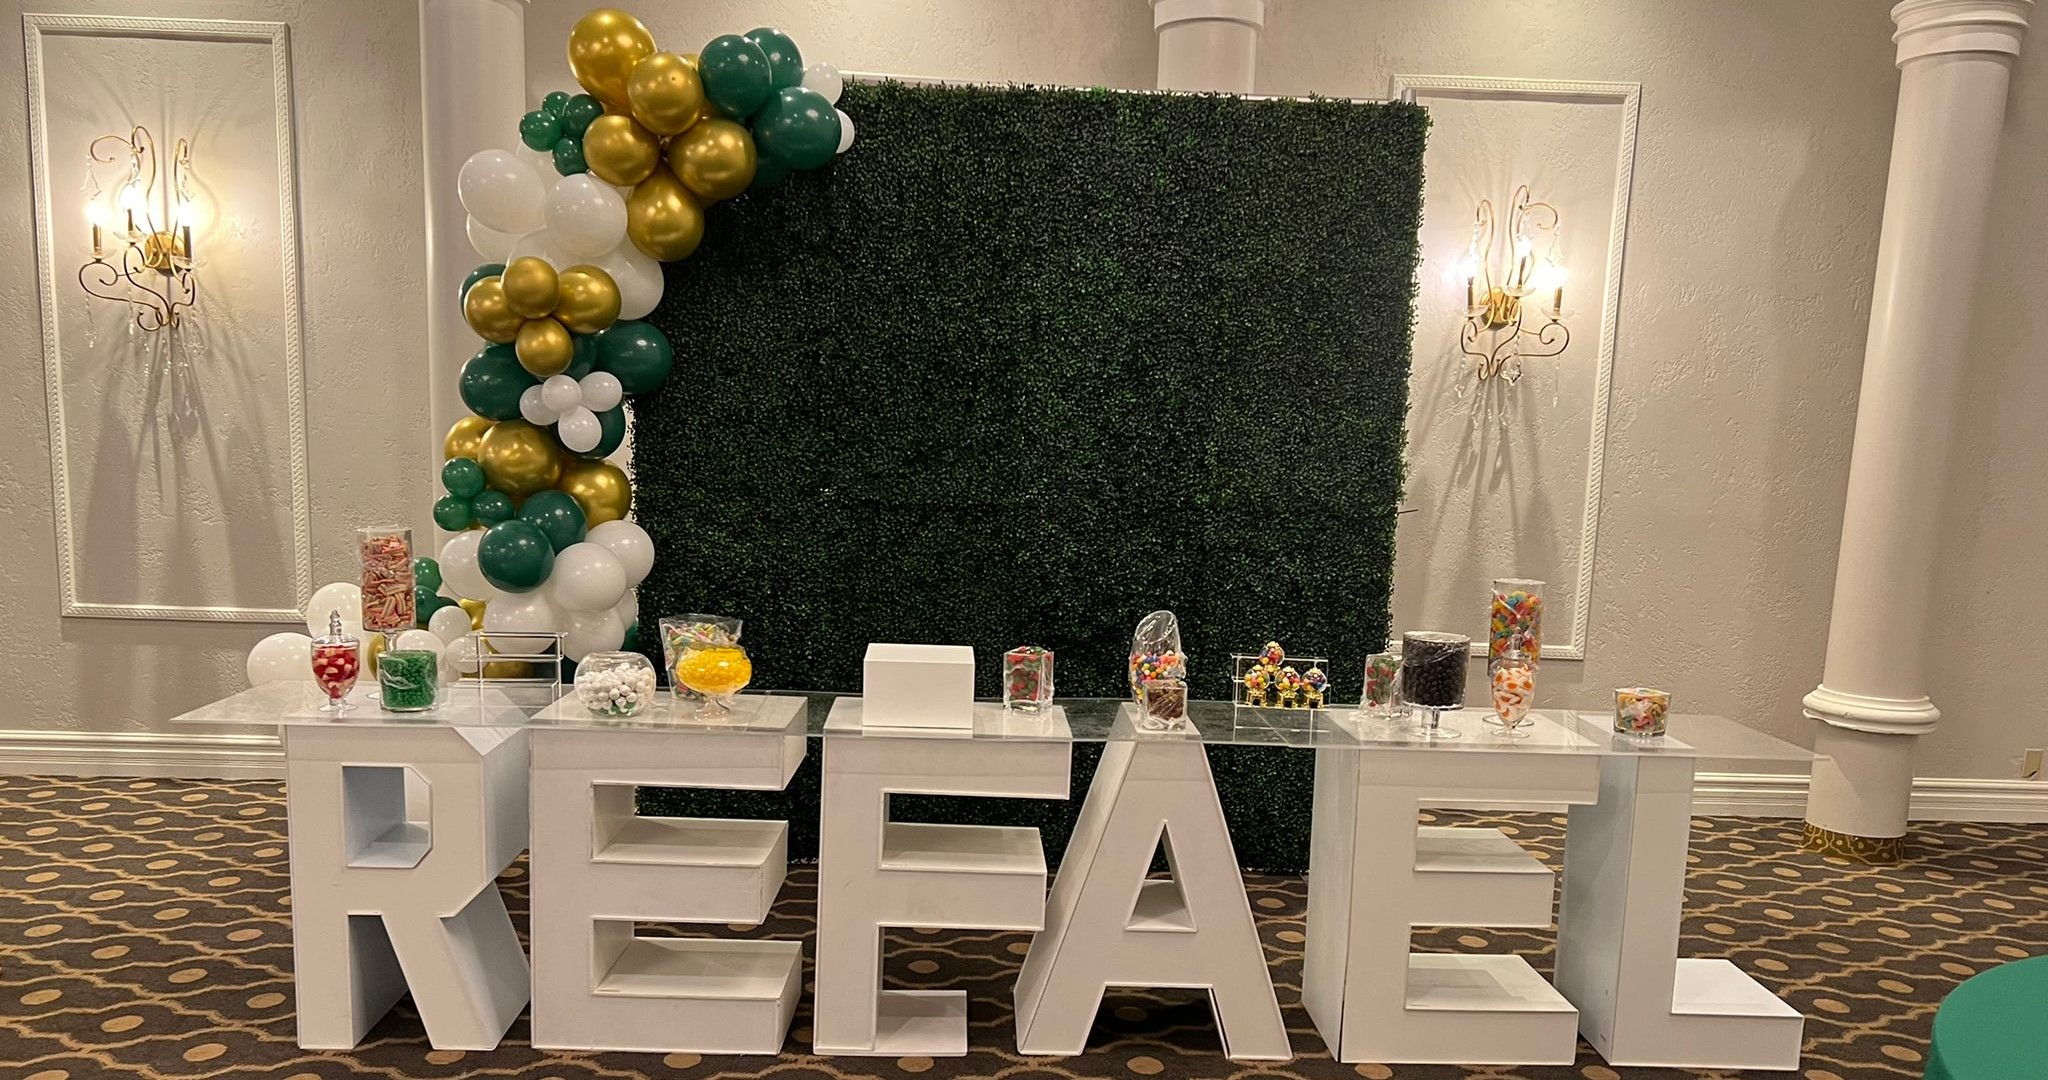 Birthday Party White Mississauga Marquee Block Letters Company